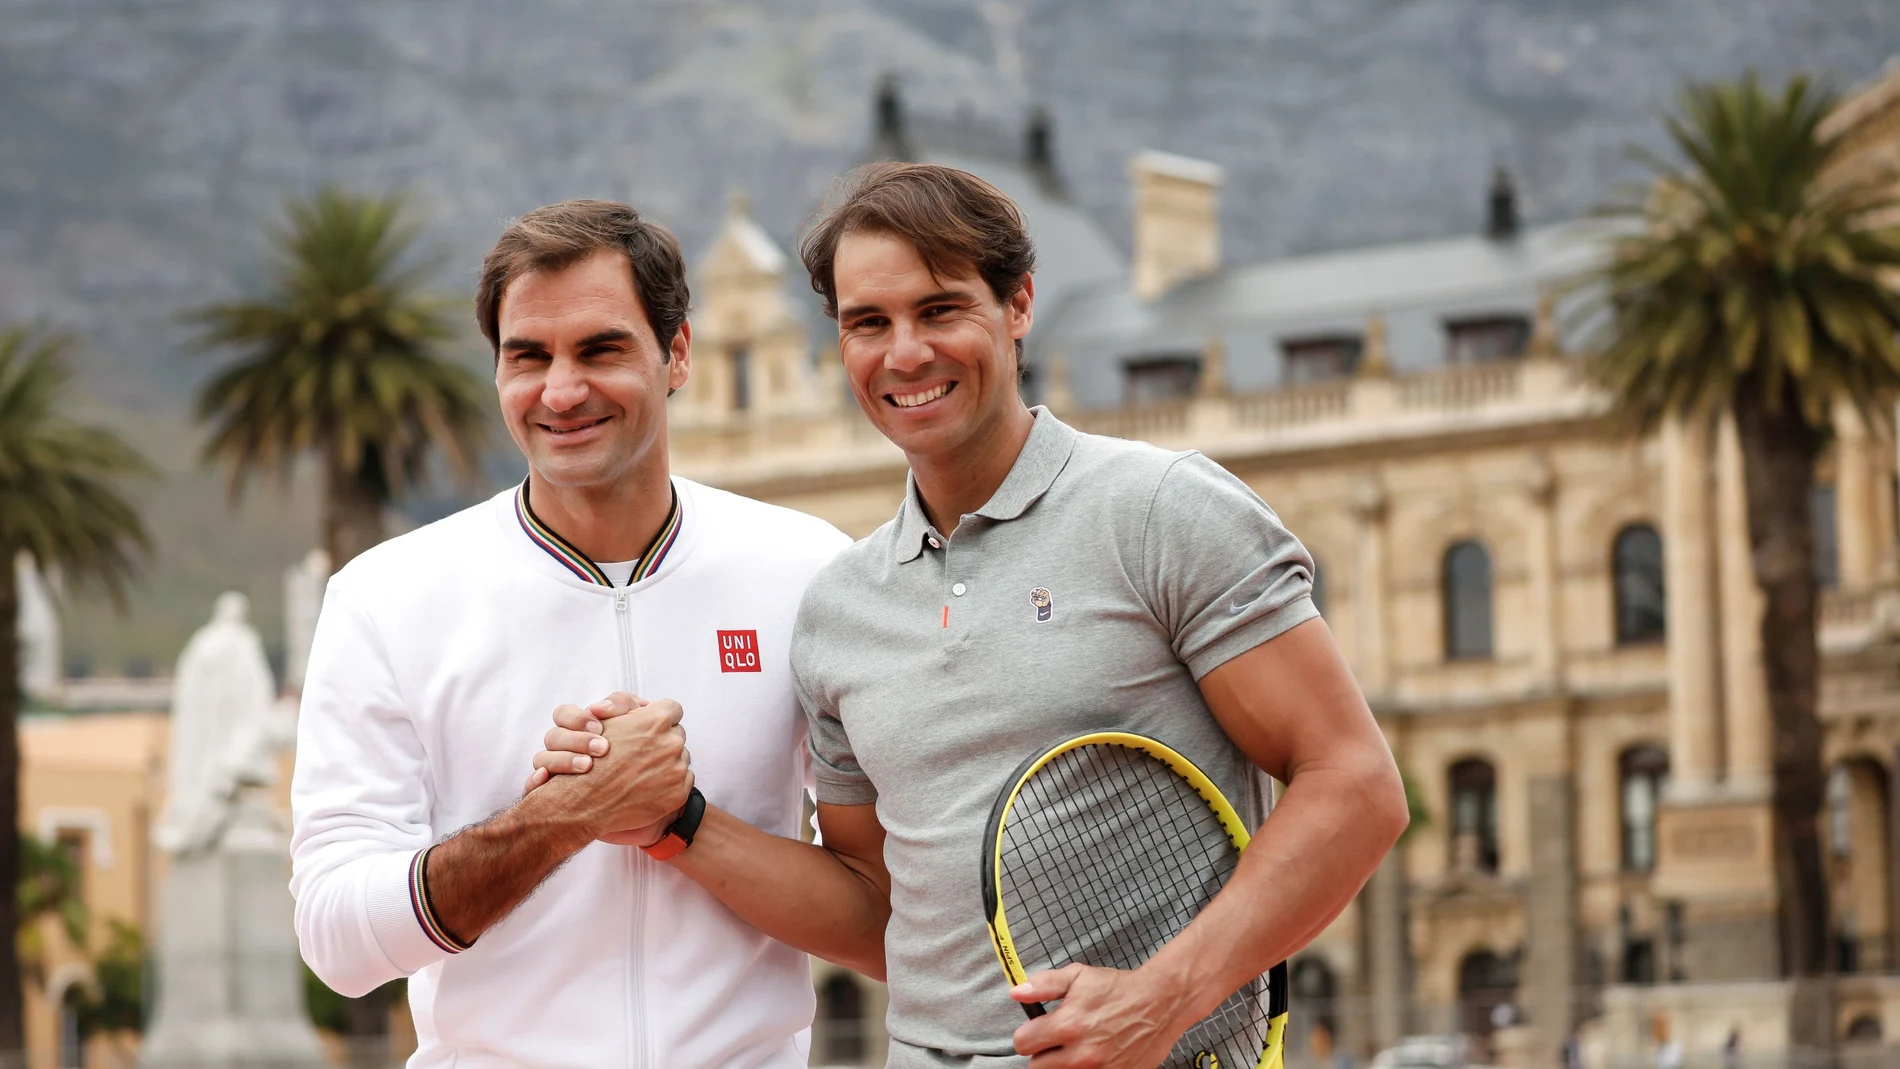 FILE PHOTO: Roger Federer and Rafael Nadal ahead of their "Match in Africa" exhibition tennis match in Cape Town